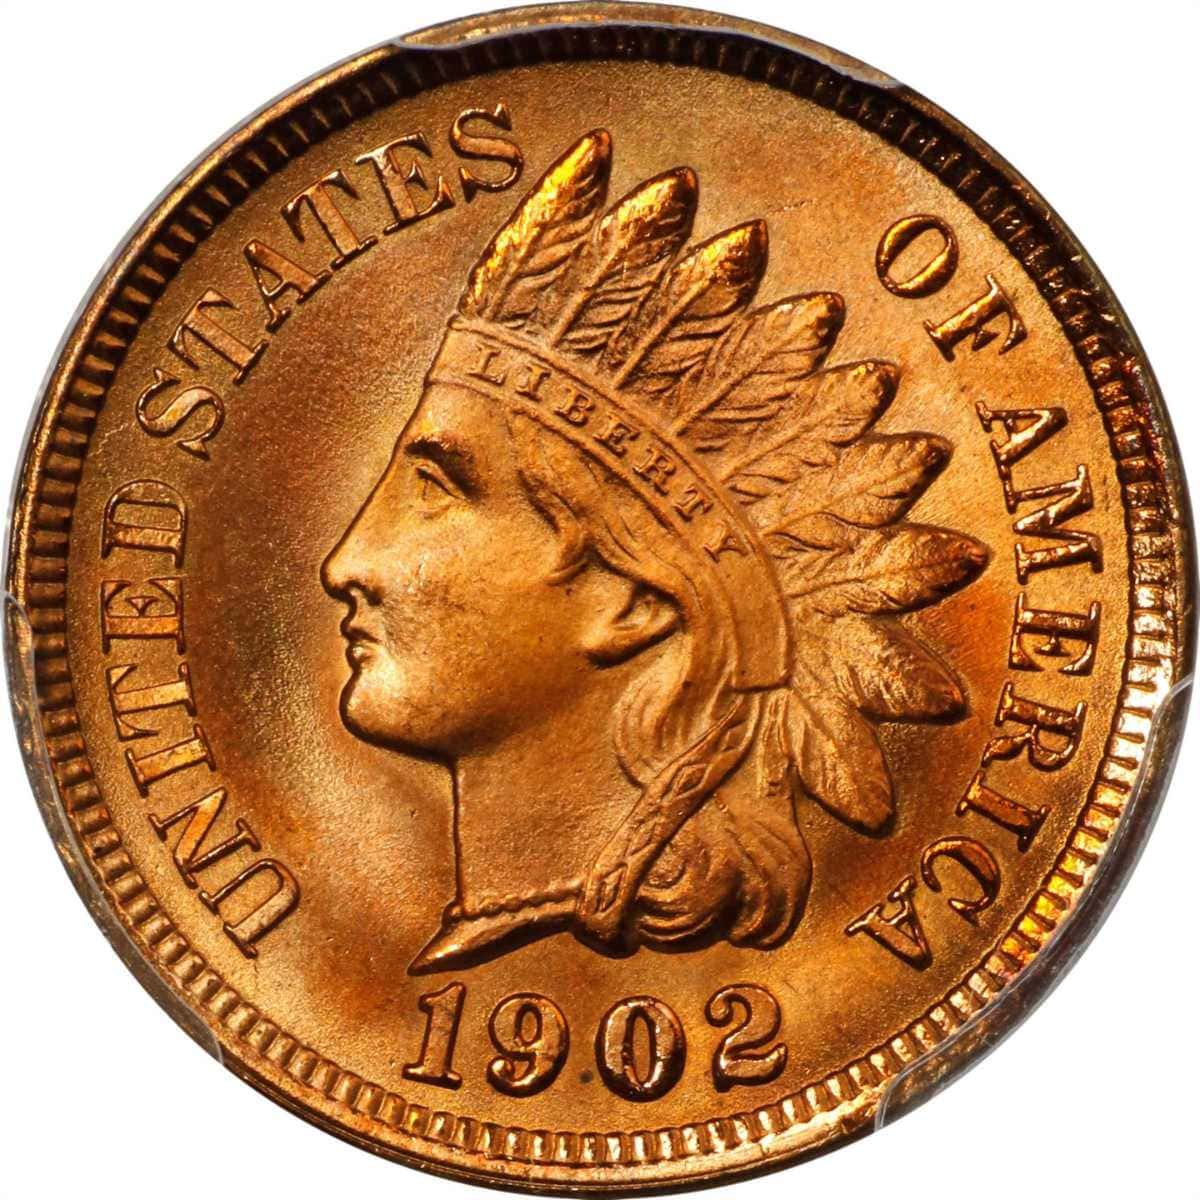 1902 Indian Head Penny Sold for $120,000